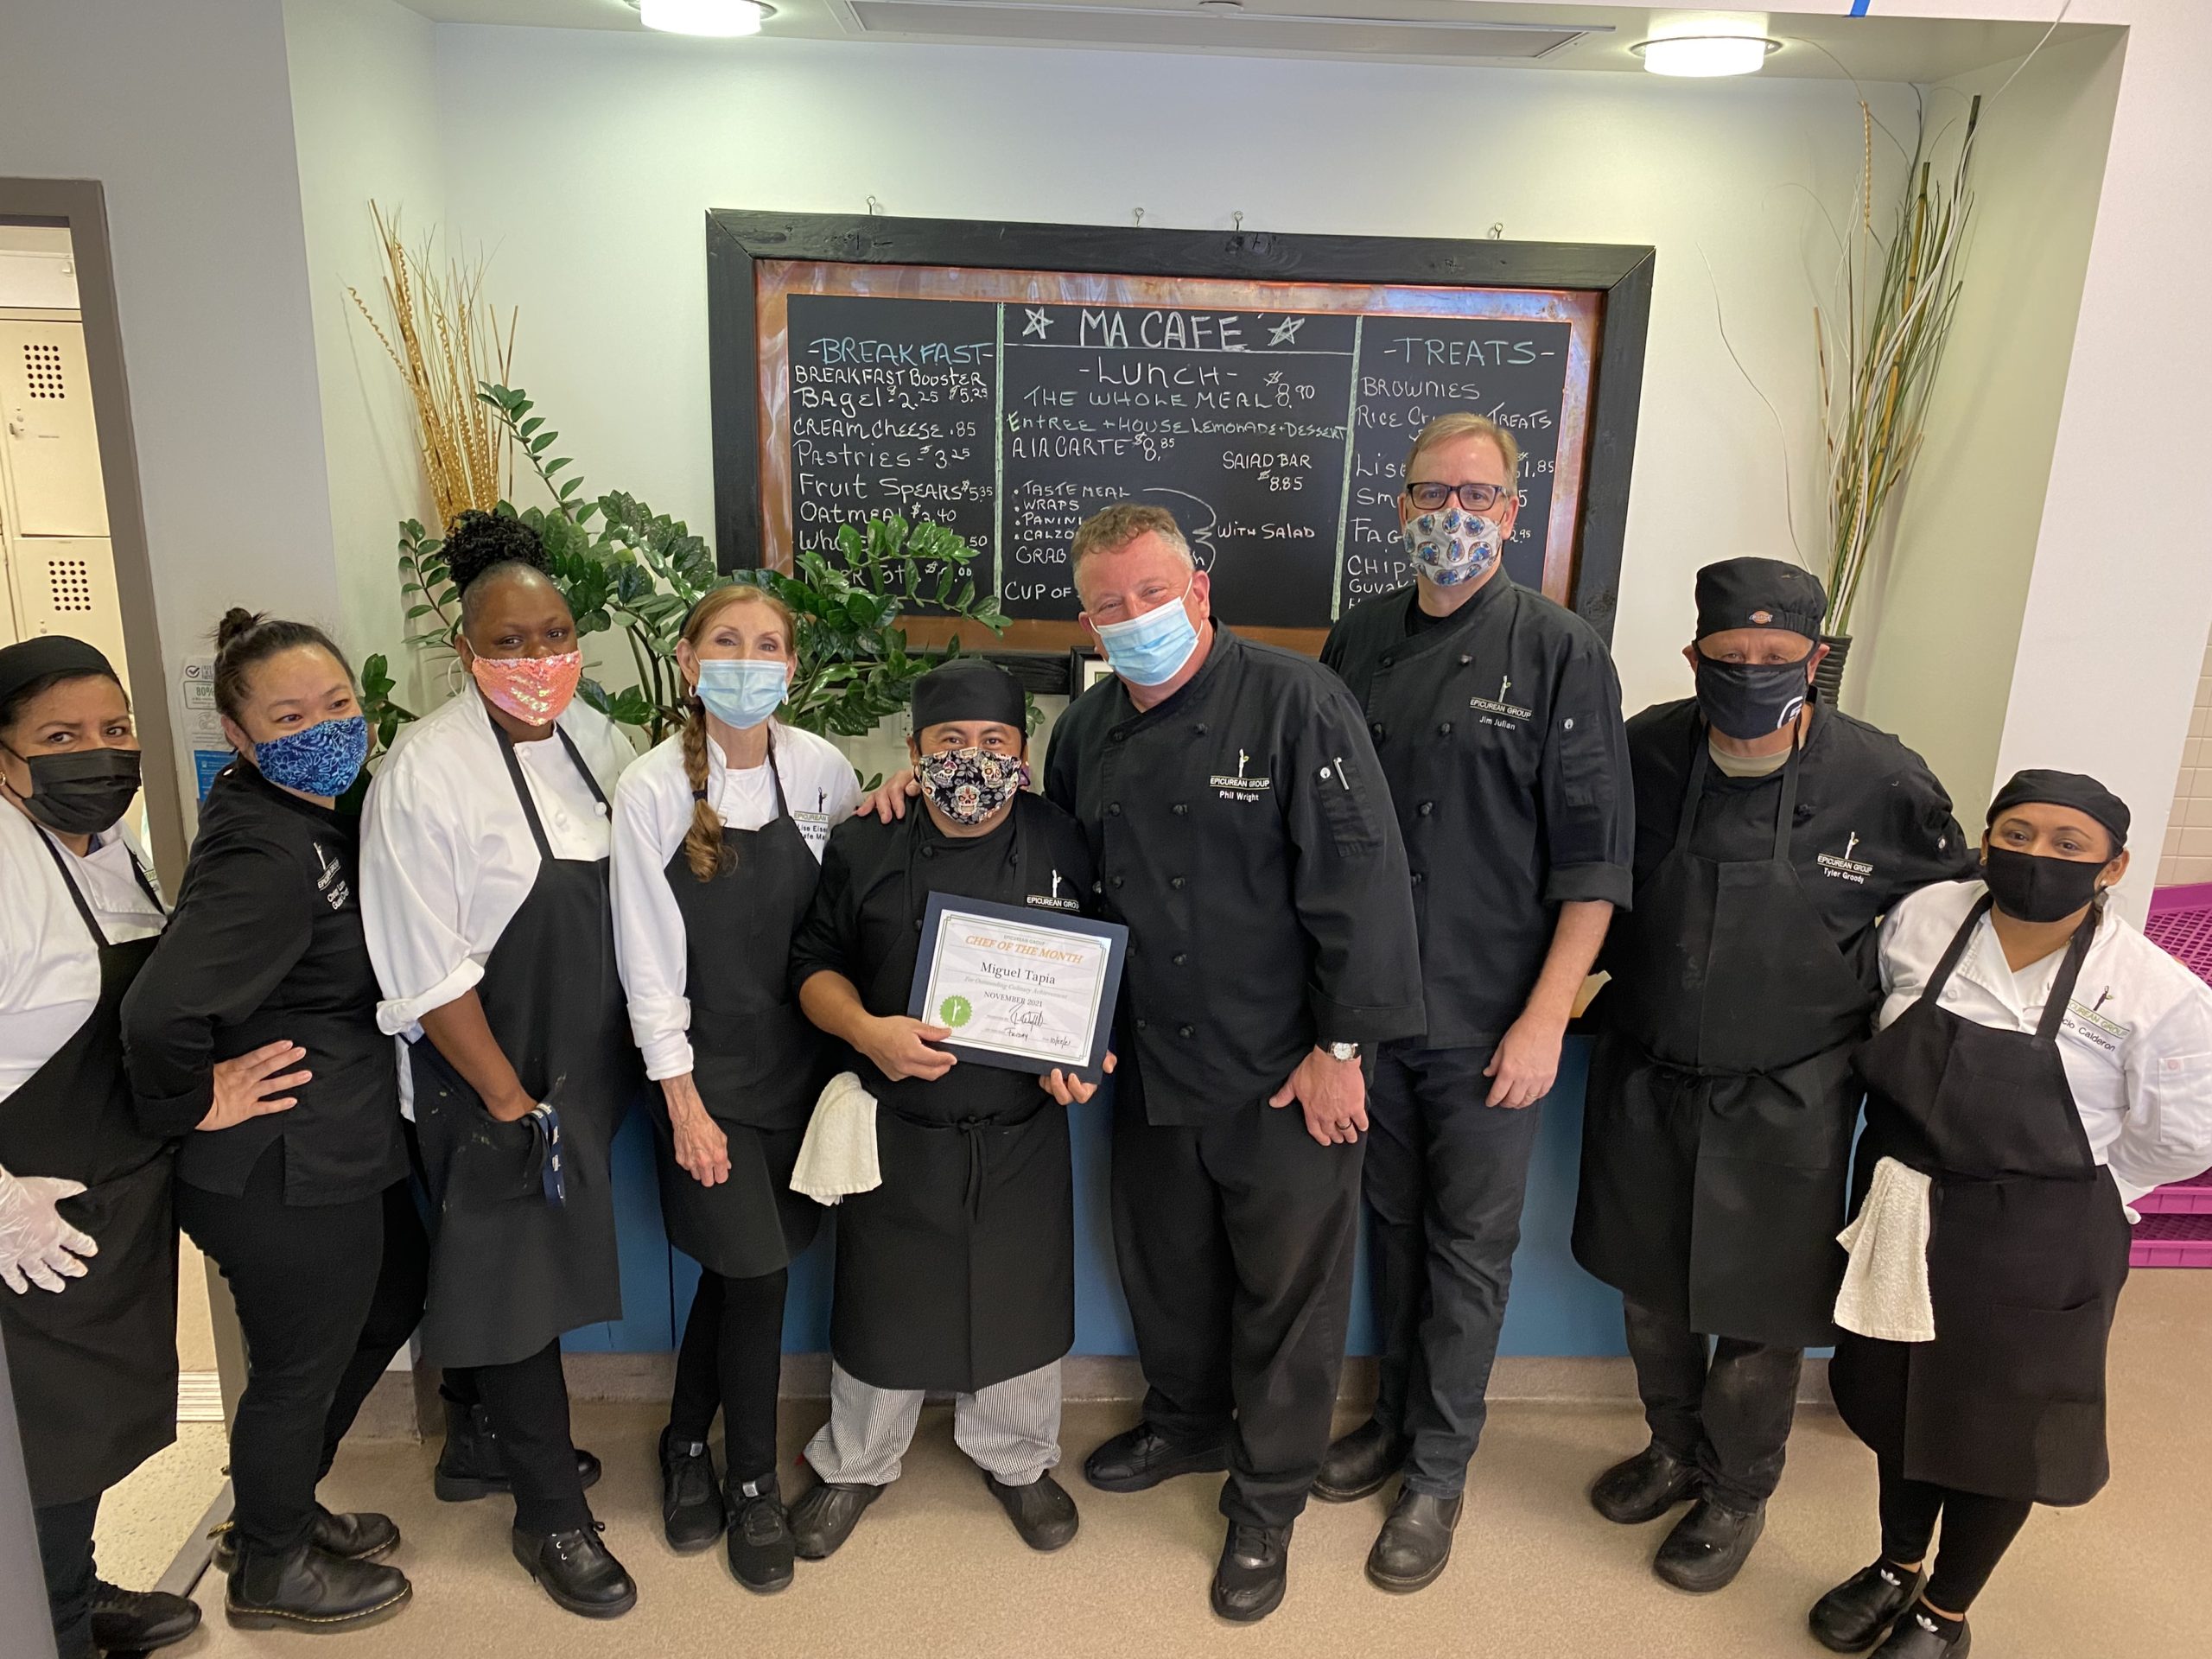 Miguel Tapia awarded as November 2021 Chef of the Month